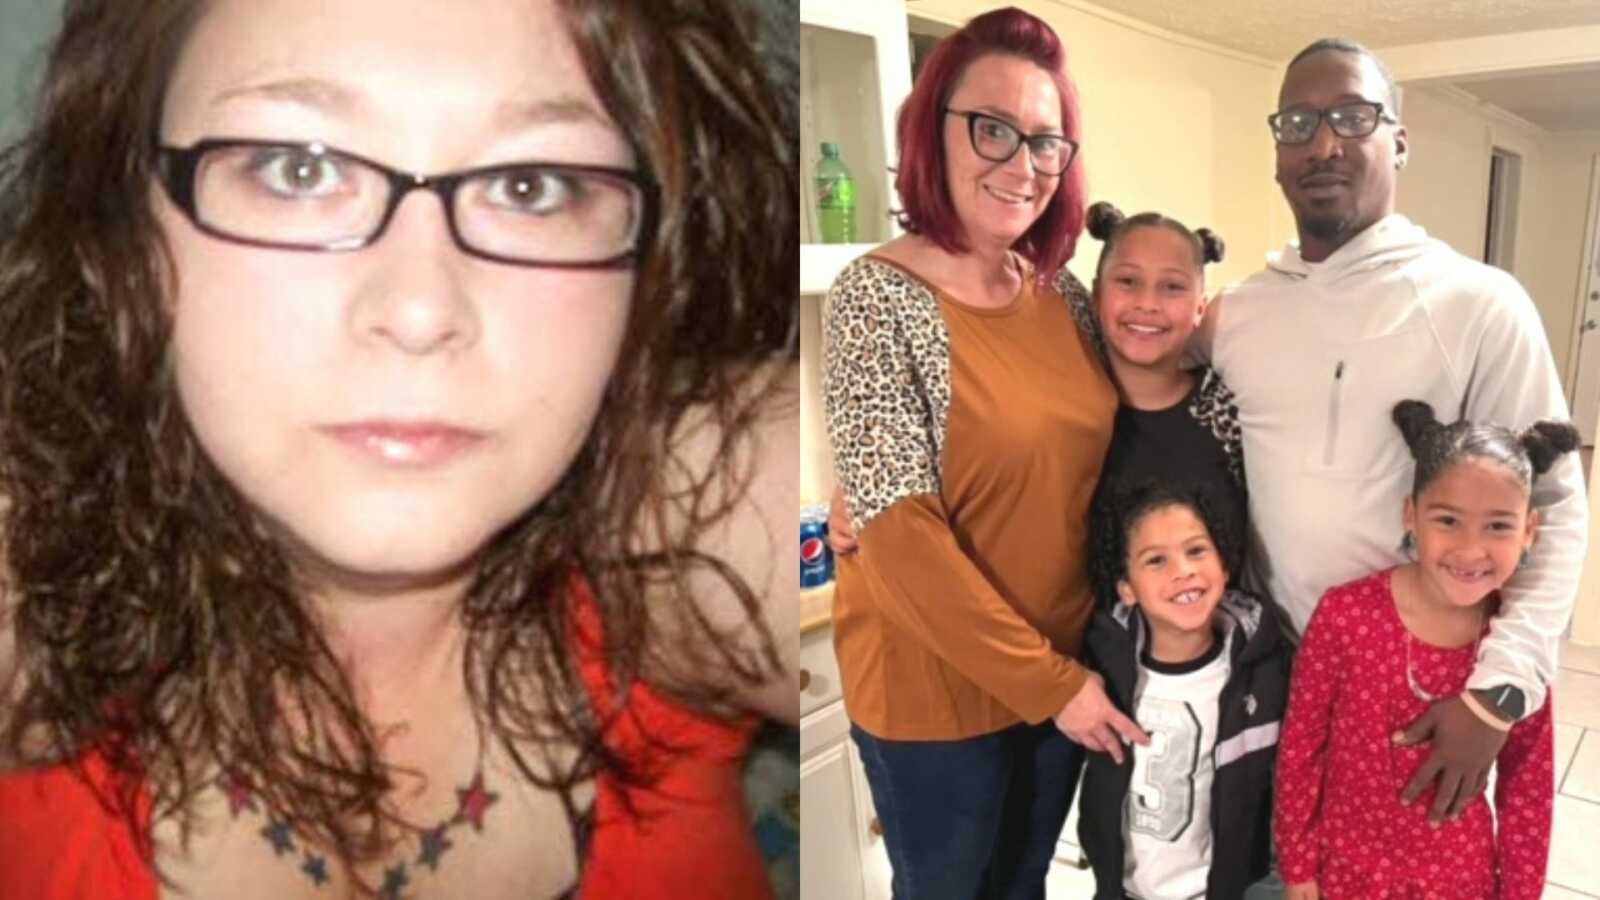 A woman in glasses and a mom with her partner and kids